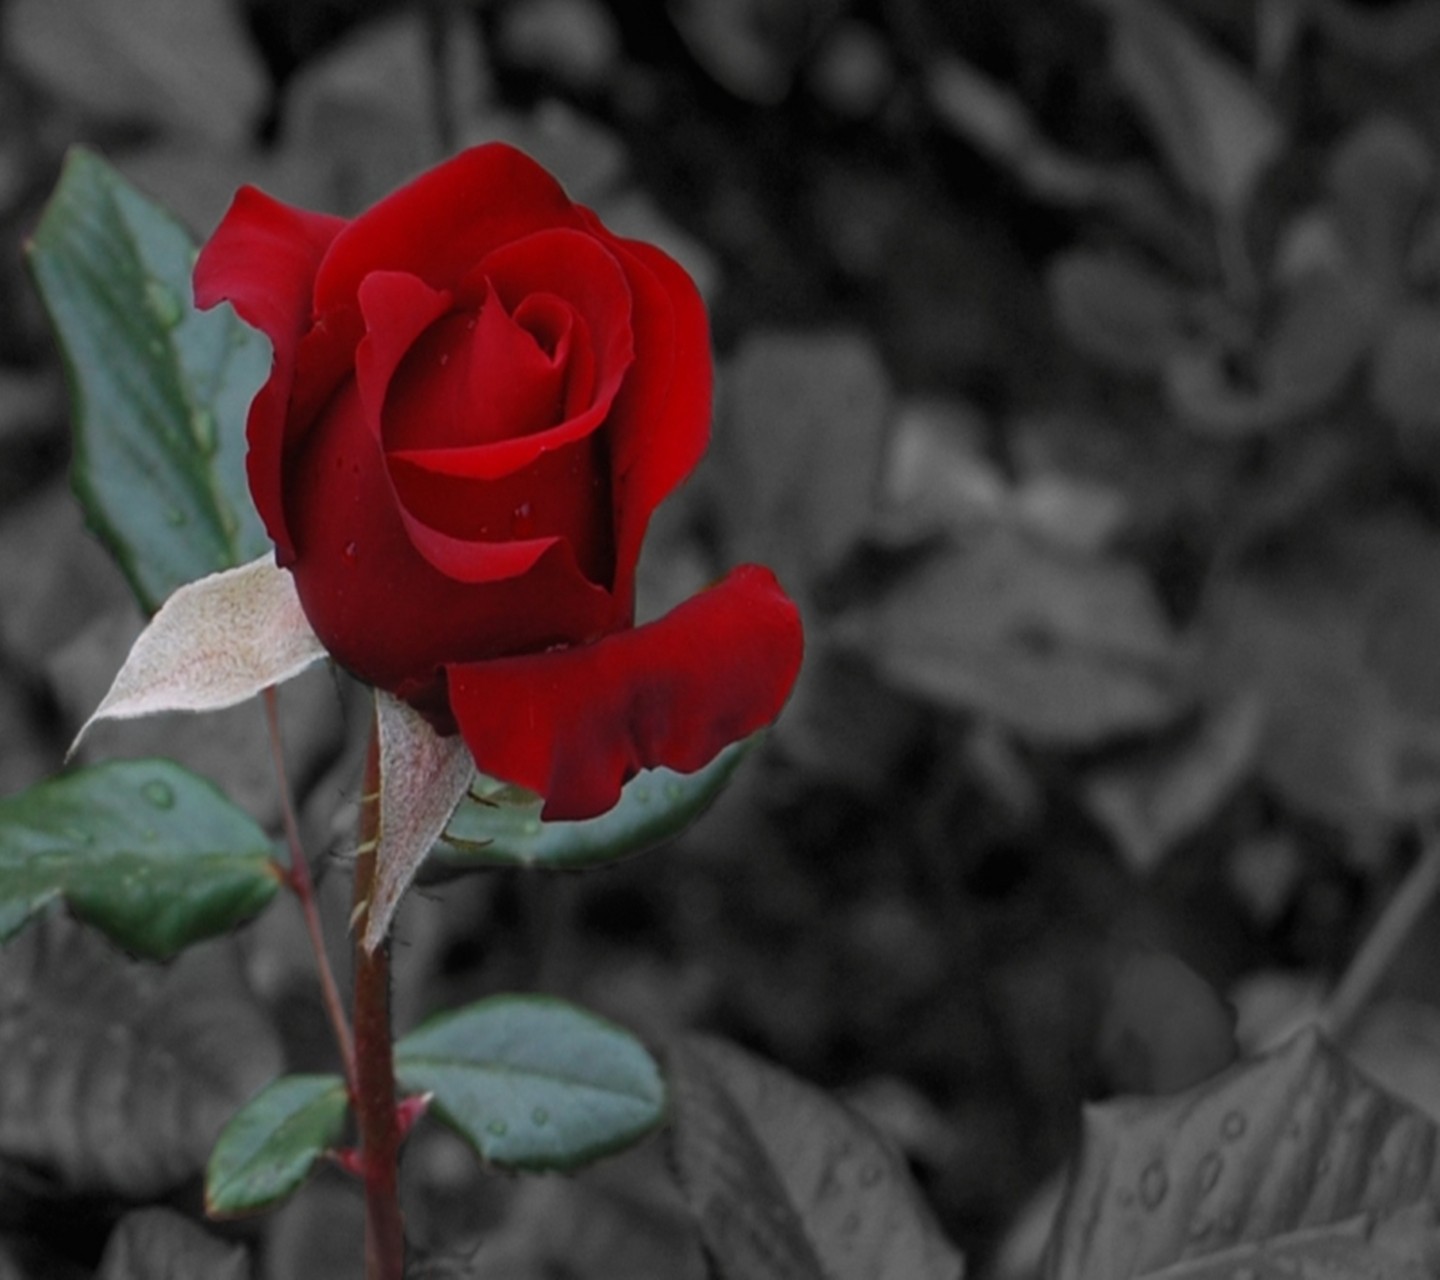 General 1440x1280 selective coloring rose red flowers flowers plants garden